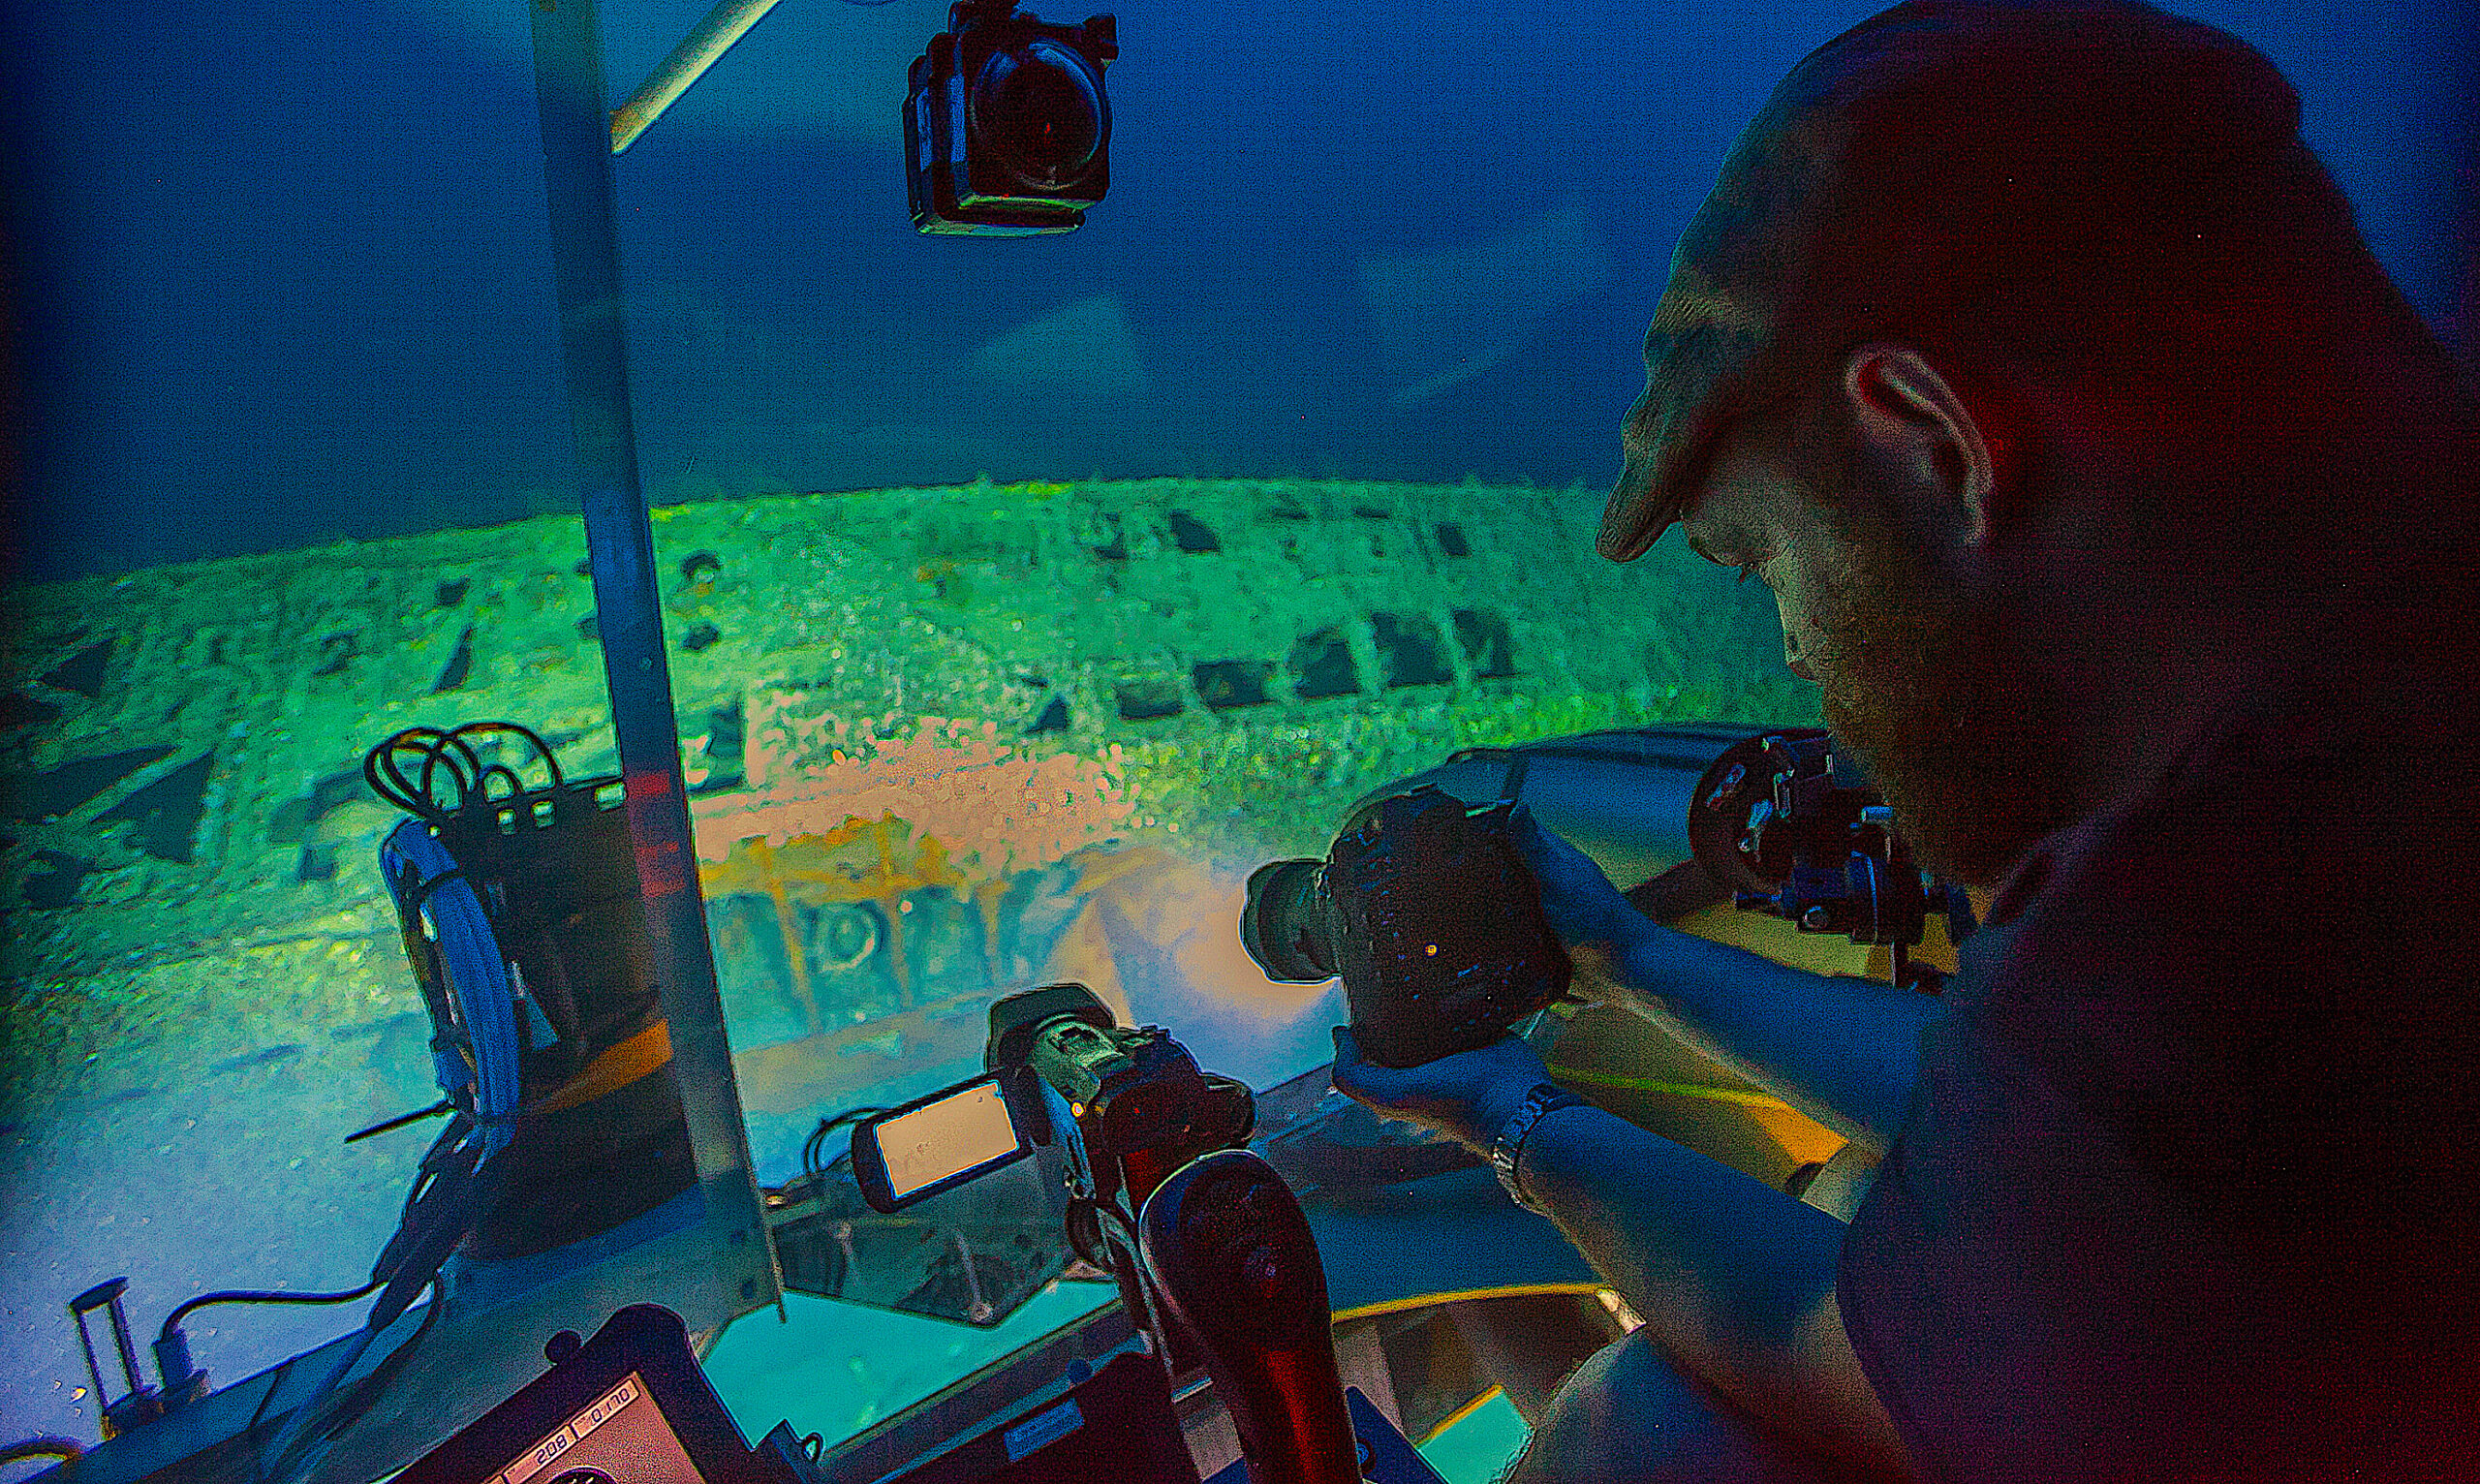 image: Joe Hoyt, maritime archaeologist with the NOAA Office of National Marine Sanctuaries, takes photos of the shipwreck from the submersible. Credit: Robert Carmichael/NOAA’s Battle of the Atlantic Expedition.